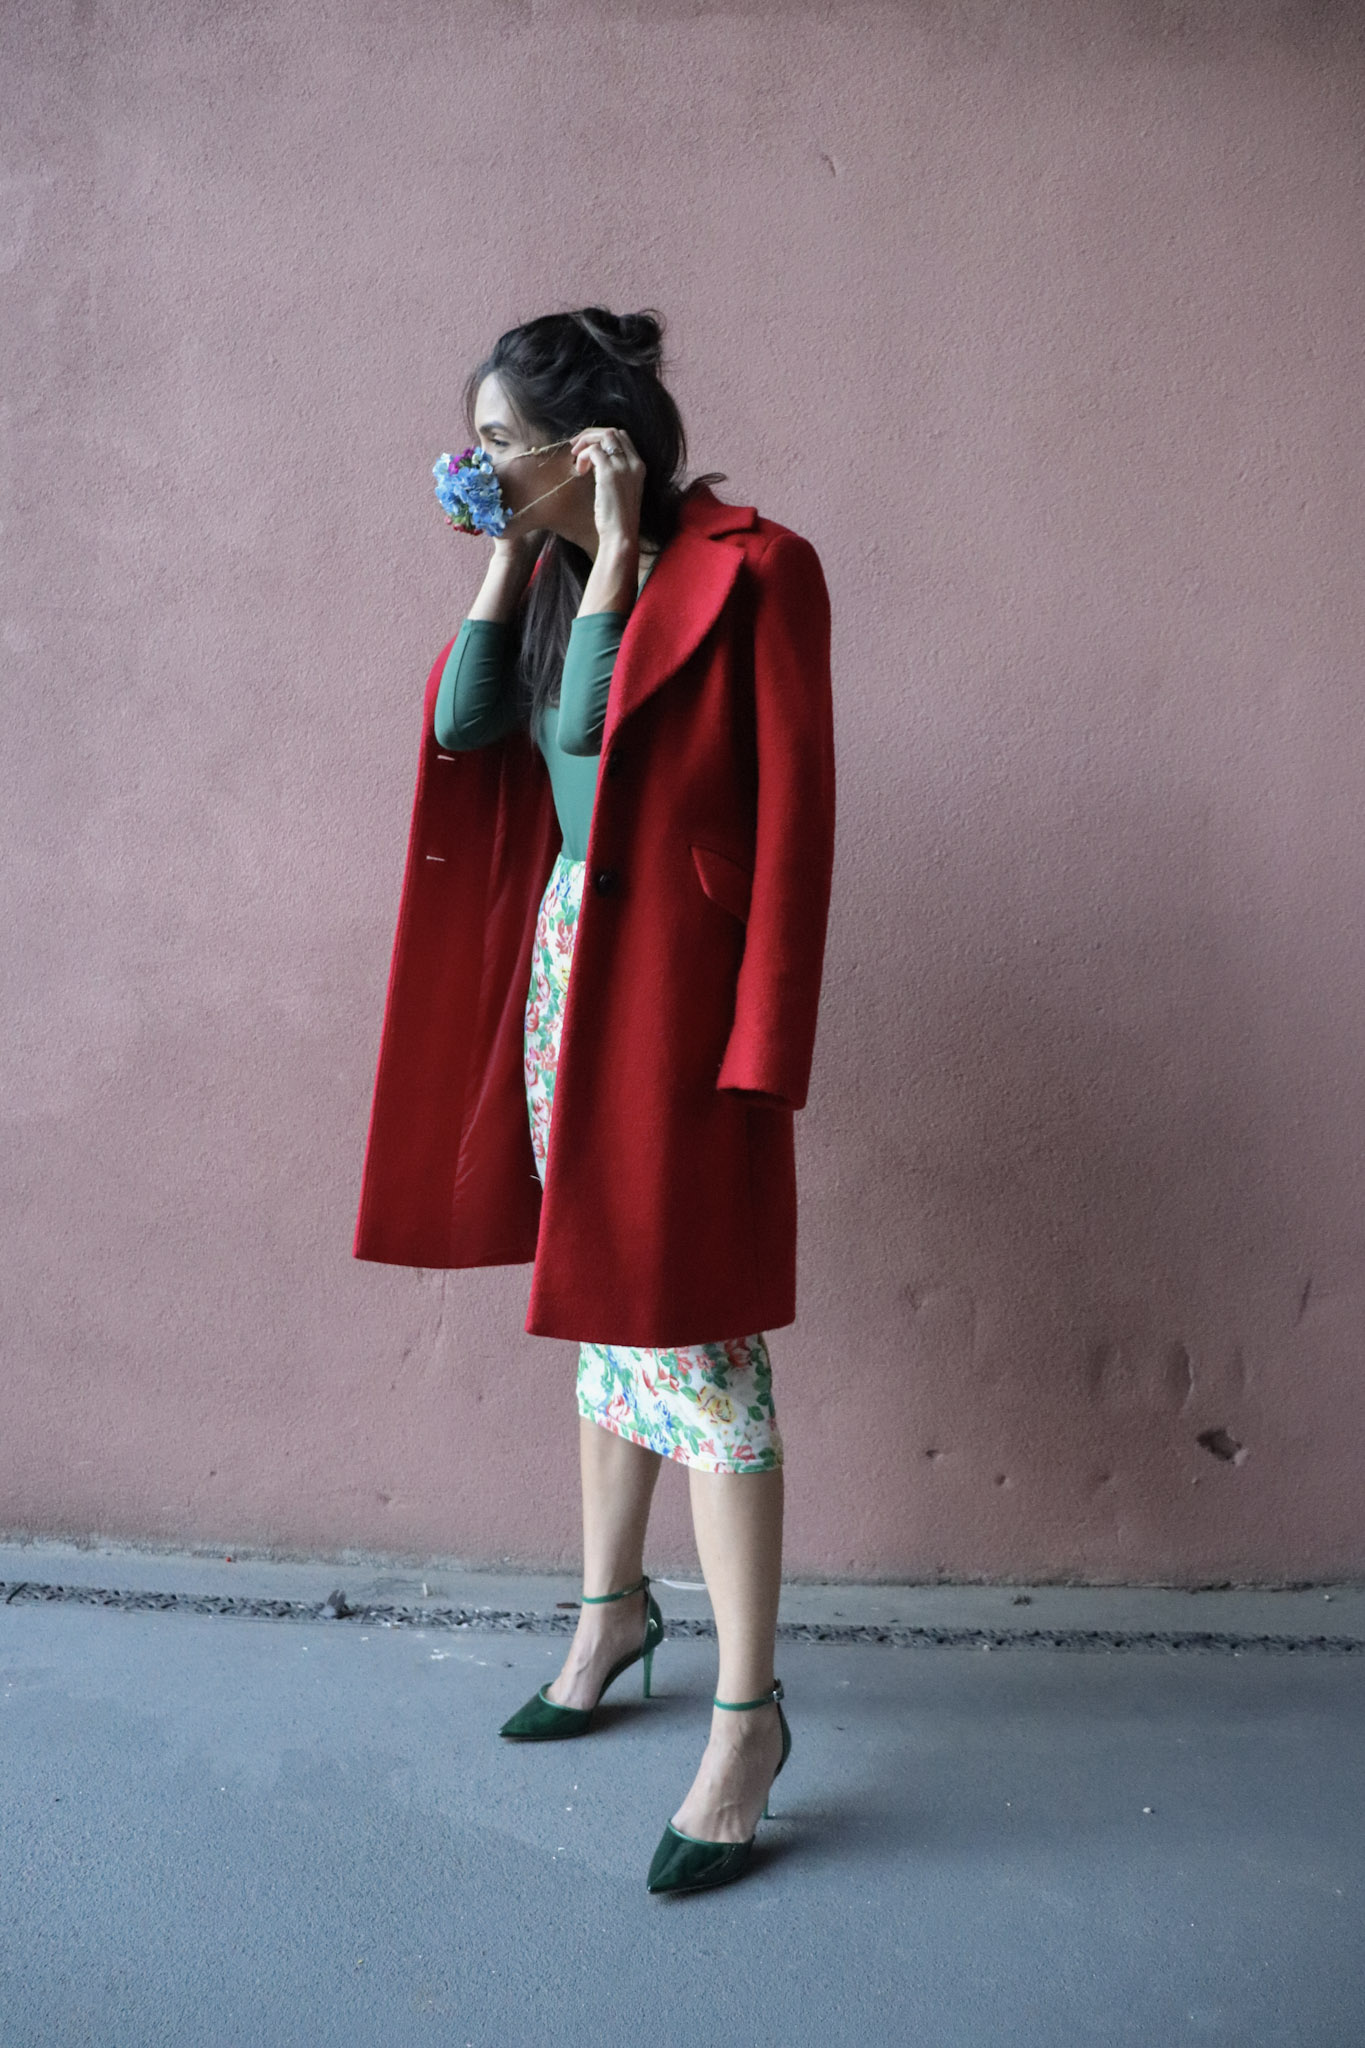 Charlotte Artist, Holiday Red in Style, Shop Holiday Red for your Christmas Wardrobe, Holiday Red in Style, Holiday red jacket, where to find a red peacoat, christmas fashion, your christmas wardrobe celebration, holiday red